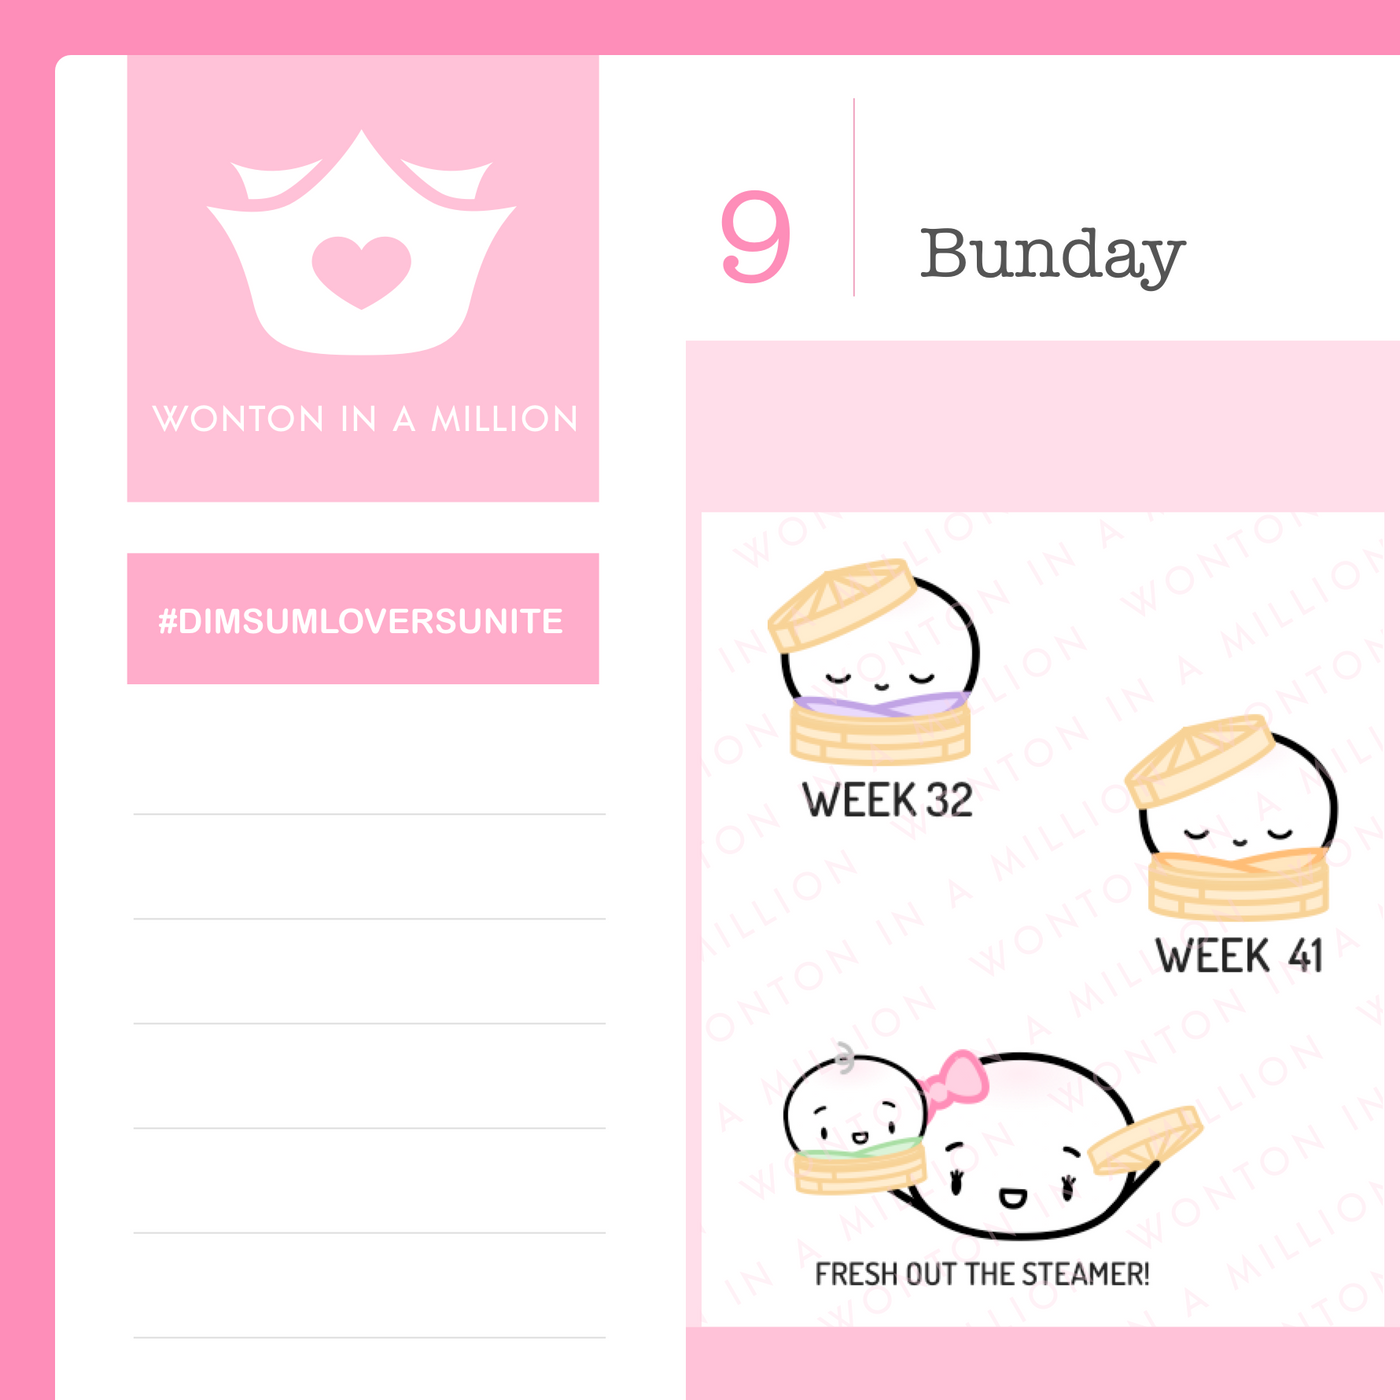 S152 | Pregnancy Tracker Stickers (2 sheets)